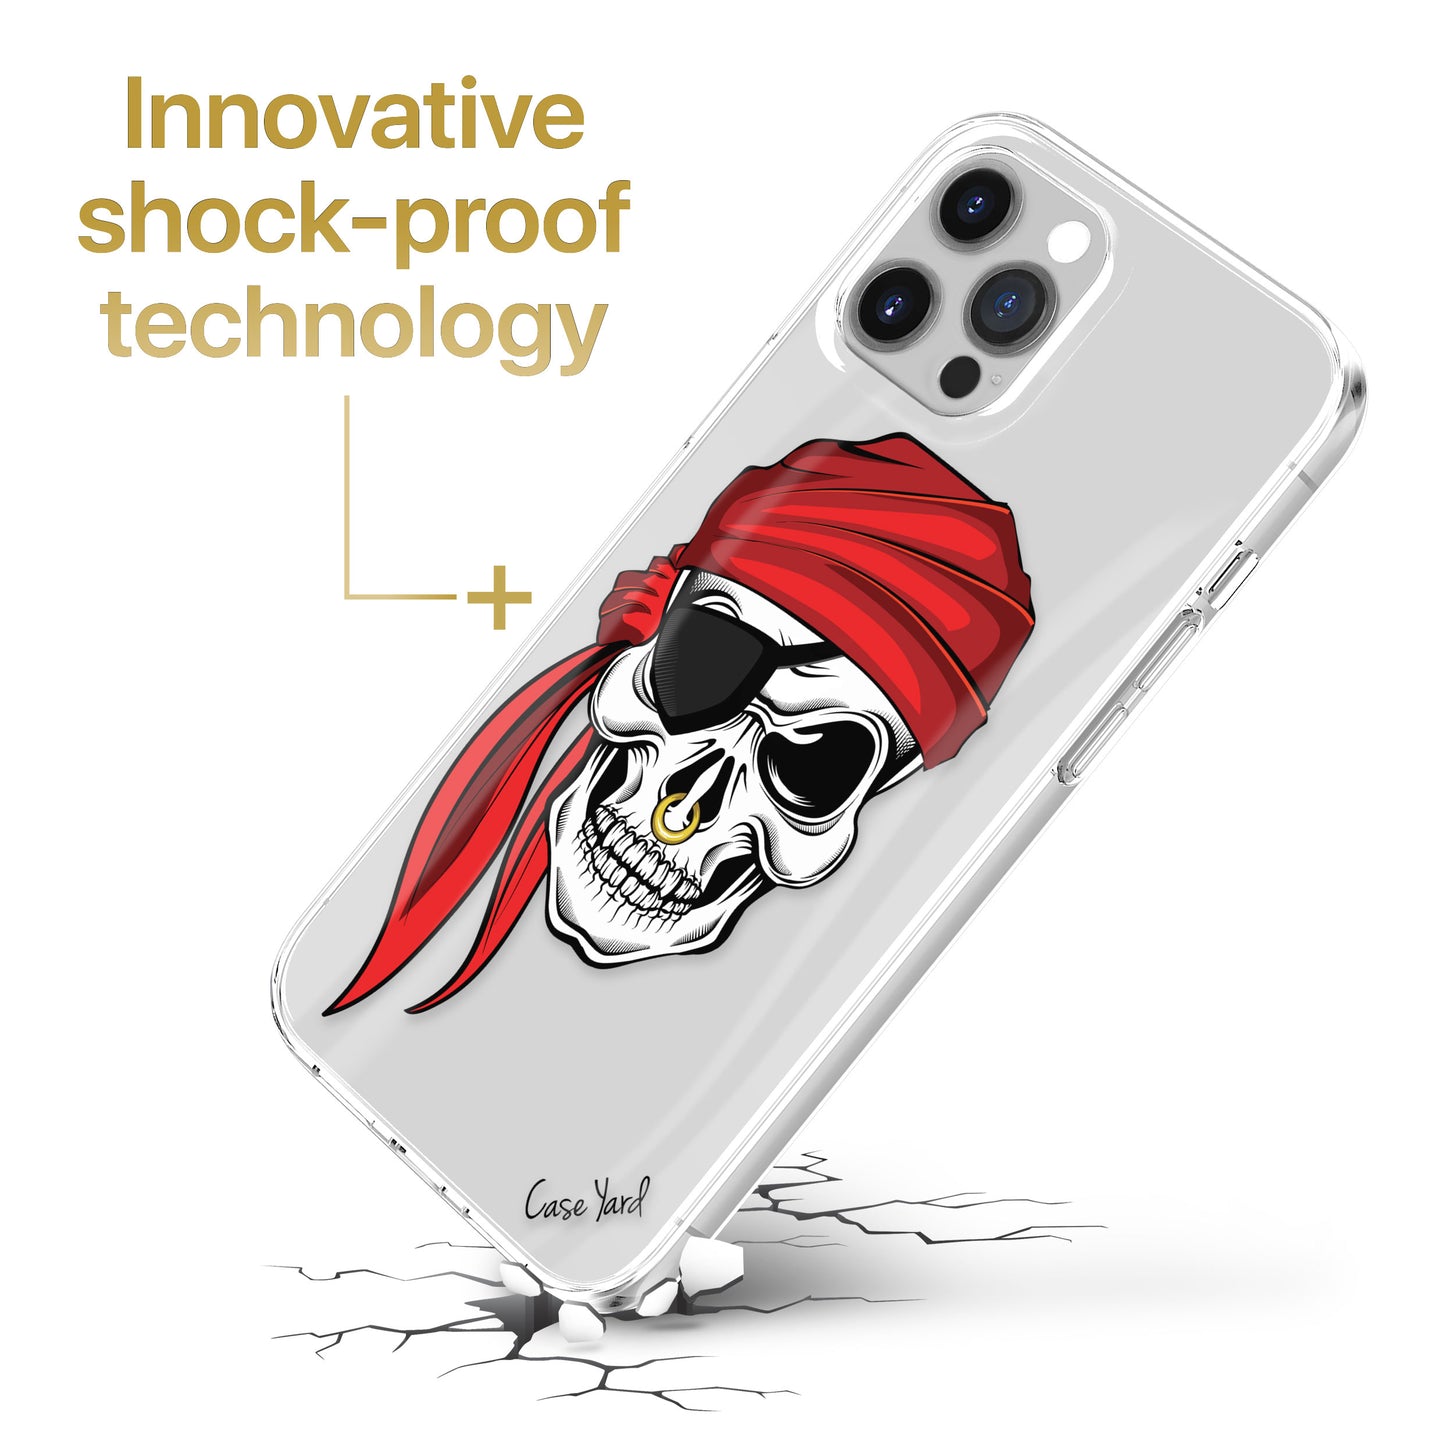 TPU Case Clear case with (Pirate Skull) Design for iPhone & Samsung Phones